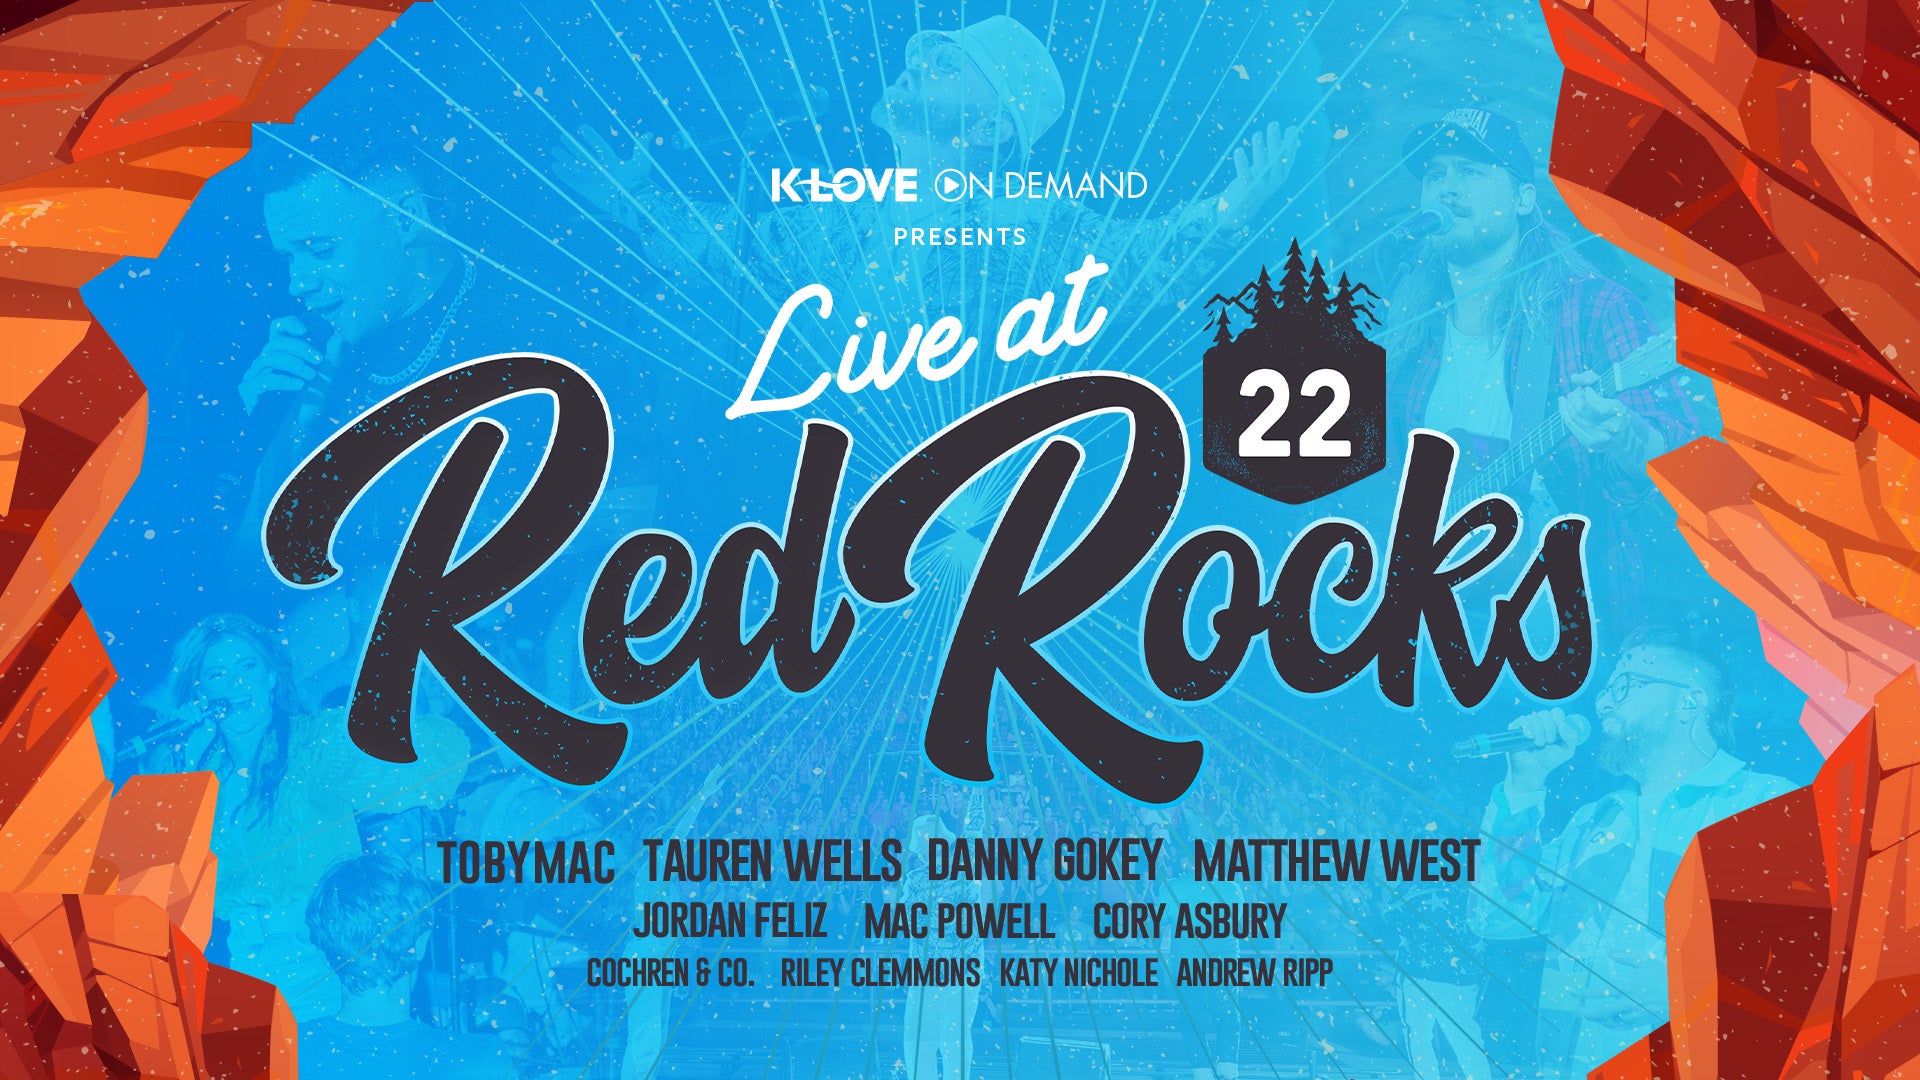 K-LOVE On Demand Presents Live at Red Rocks 22'